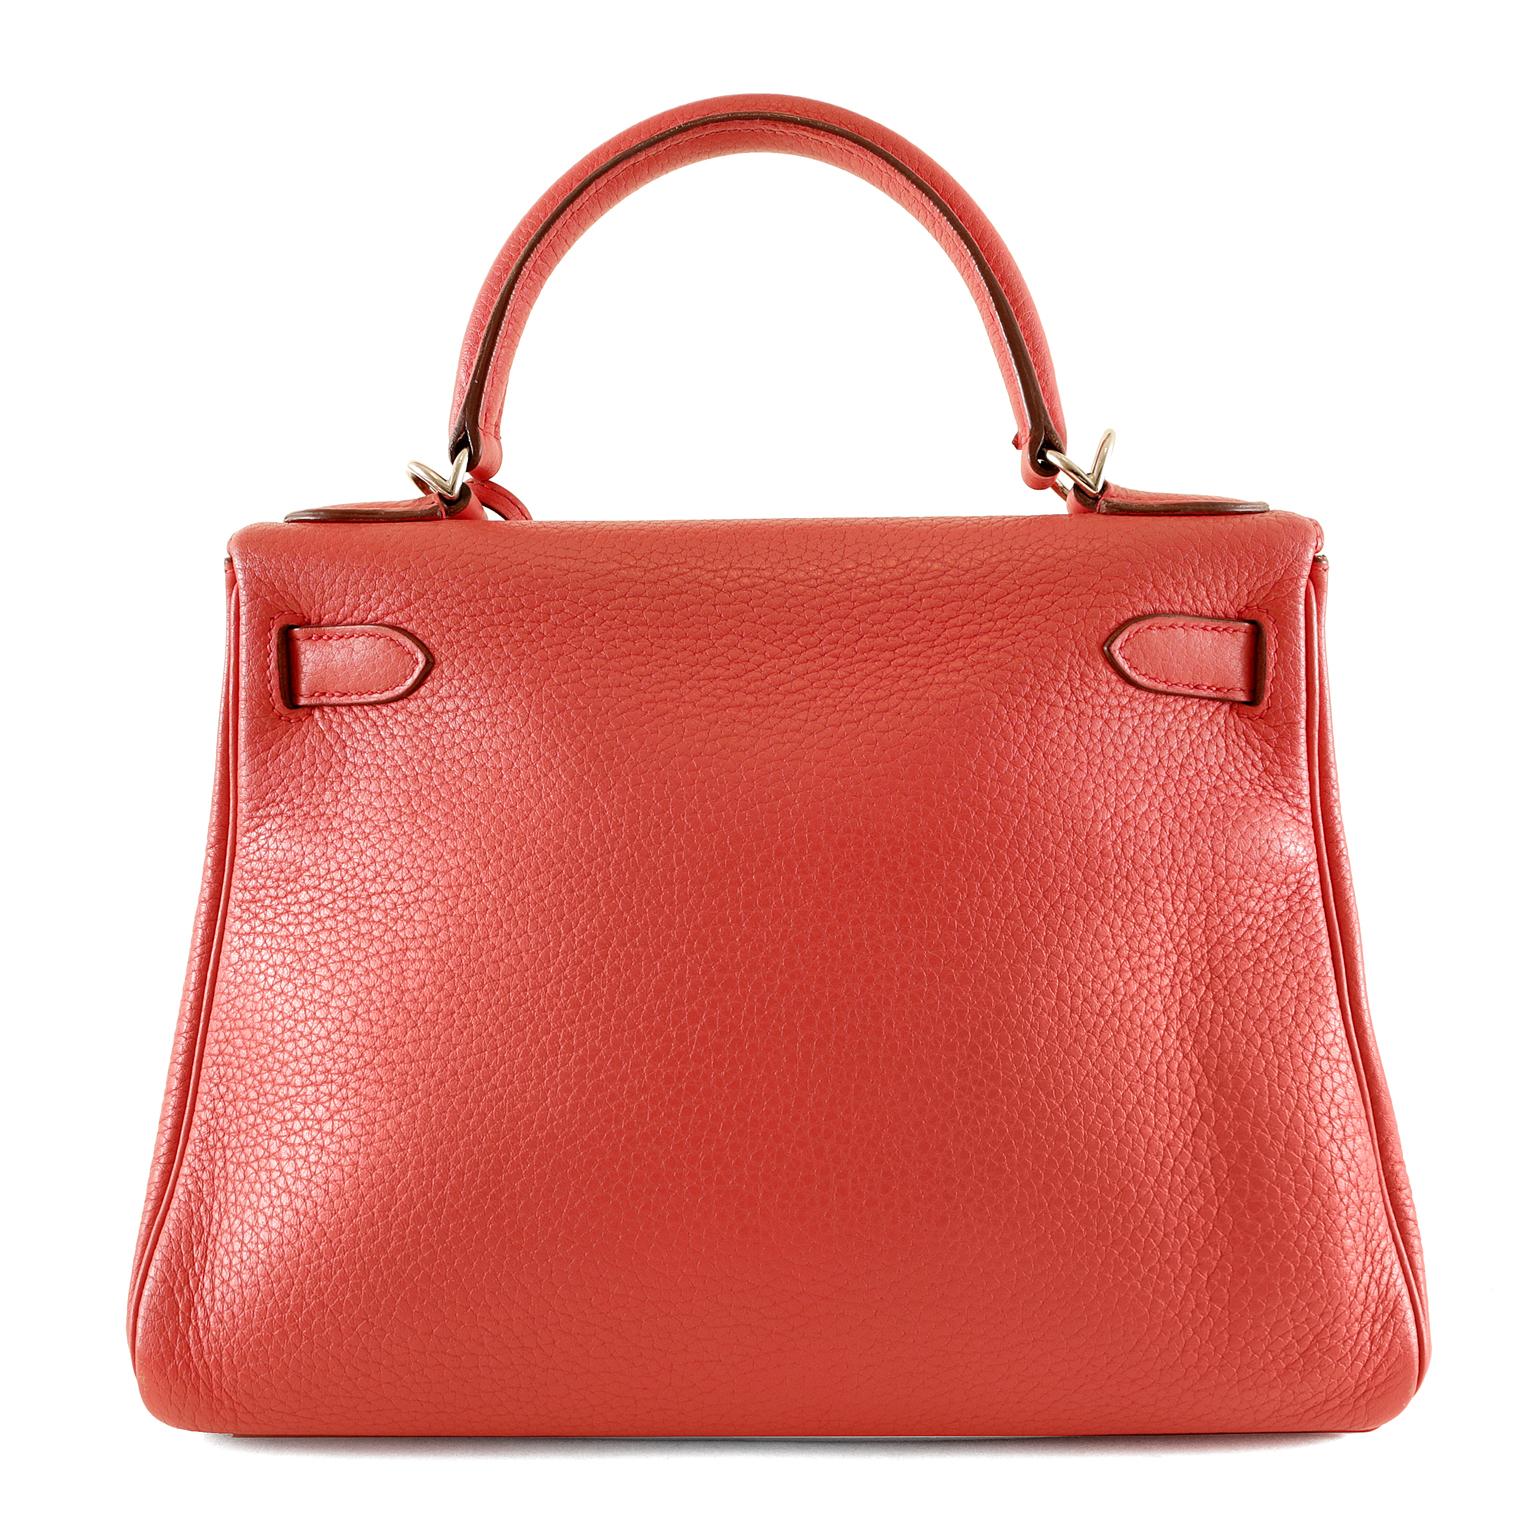 Hermès Bougainvillea 28 cm Clemence Kelly- Excellent Plus Condition 
Hermès bags are considered the ultimate luxury item worldwide.  Each piece is handcrafted with waitlists that can exceed a year or more.  Bougainvillea is a vibrant red with